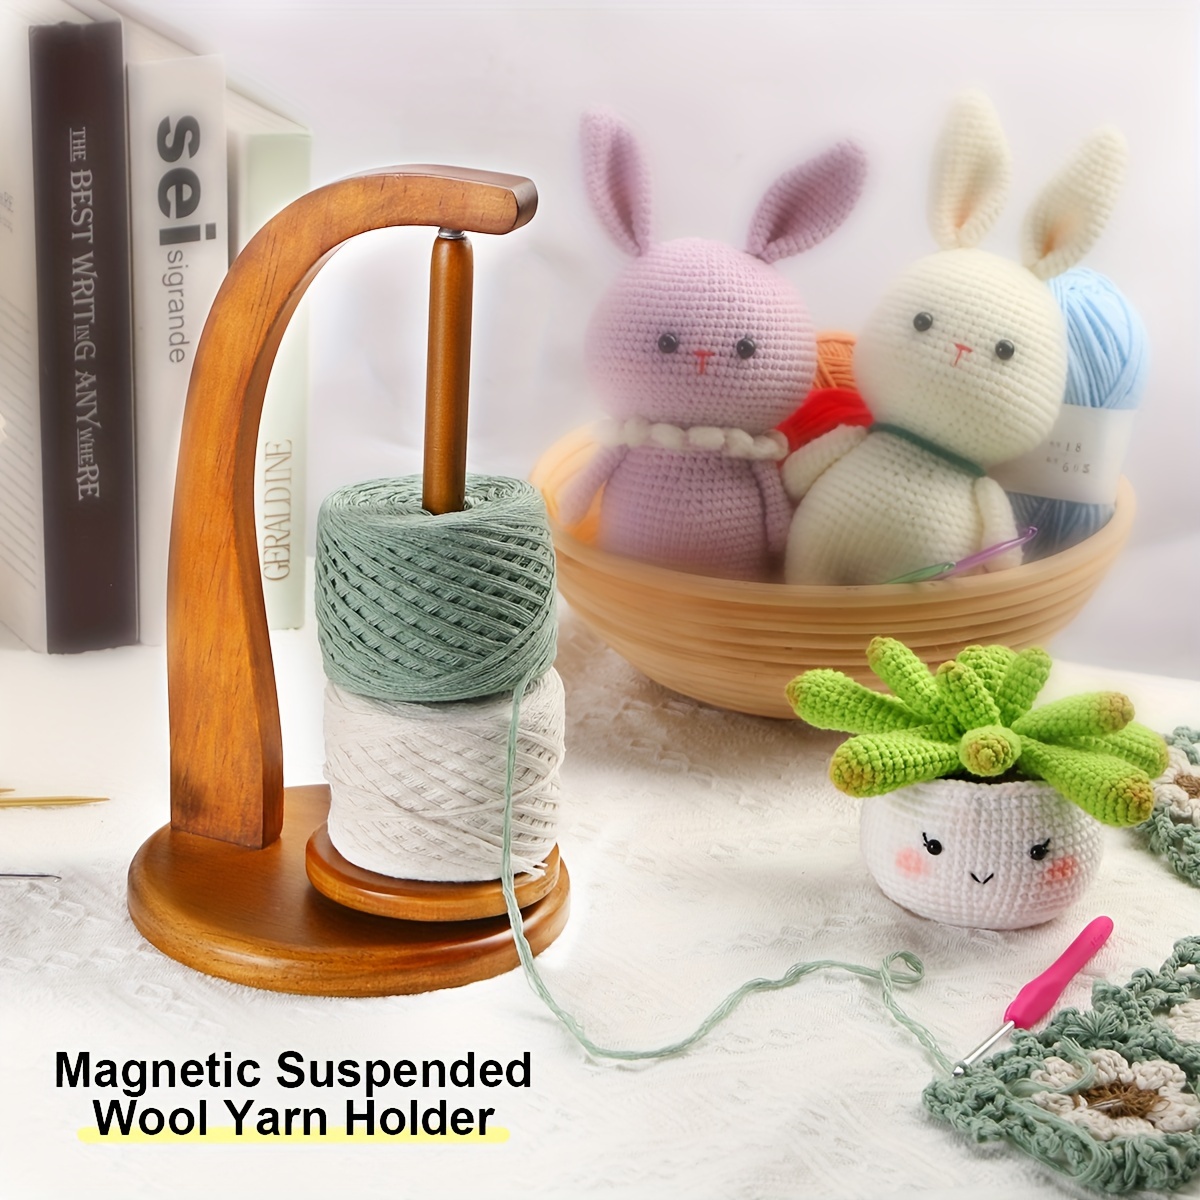 Newest Model Magnetic Pendulum Wooden Yarn Holder for Crocheting,Yarn Storage Organizer with Yarn Spinner for Balls,Delightful Surprise Gift for